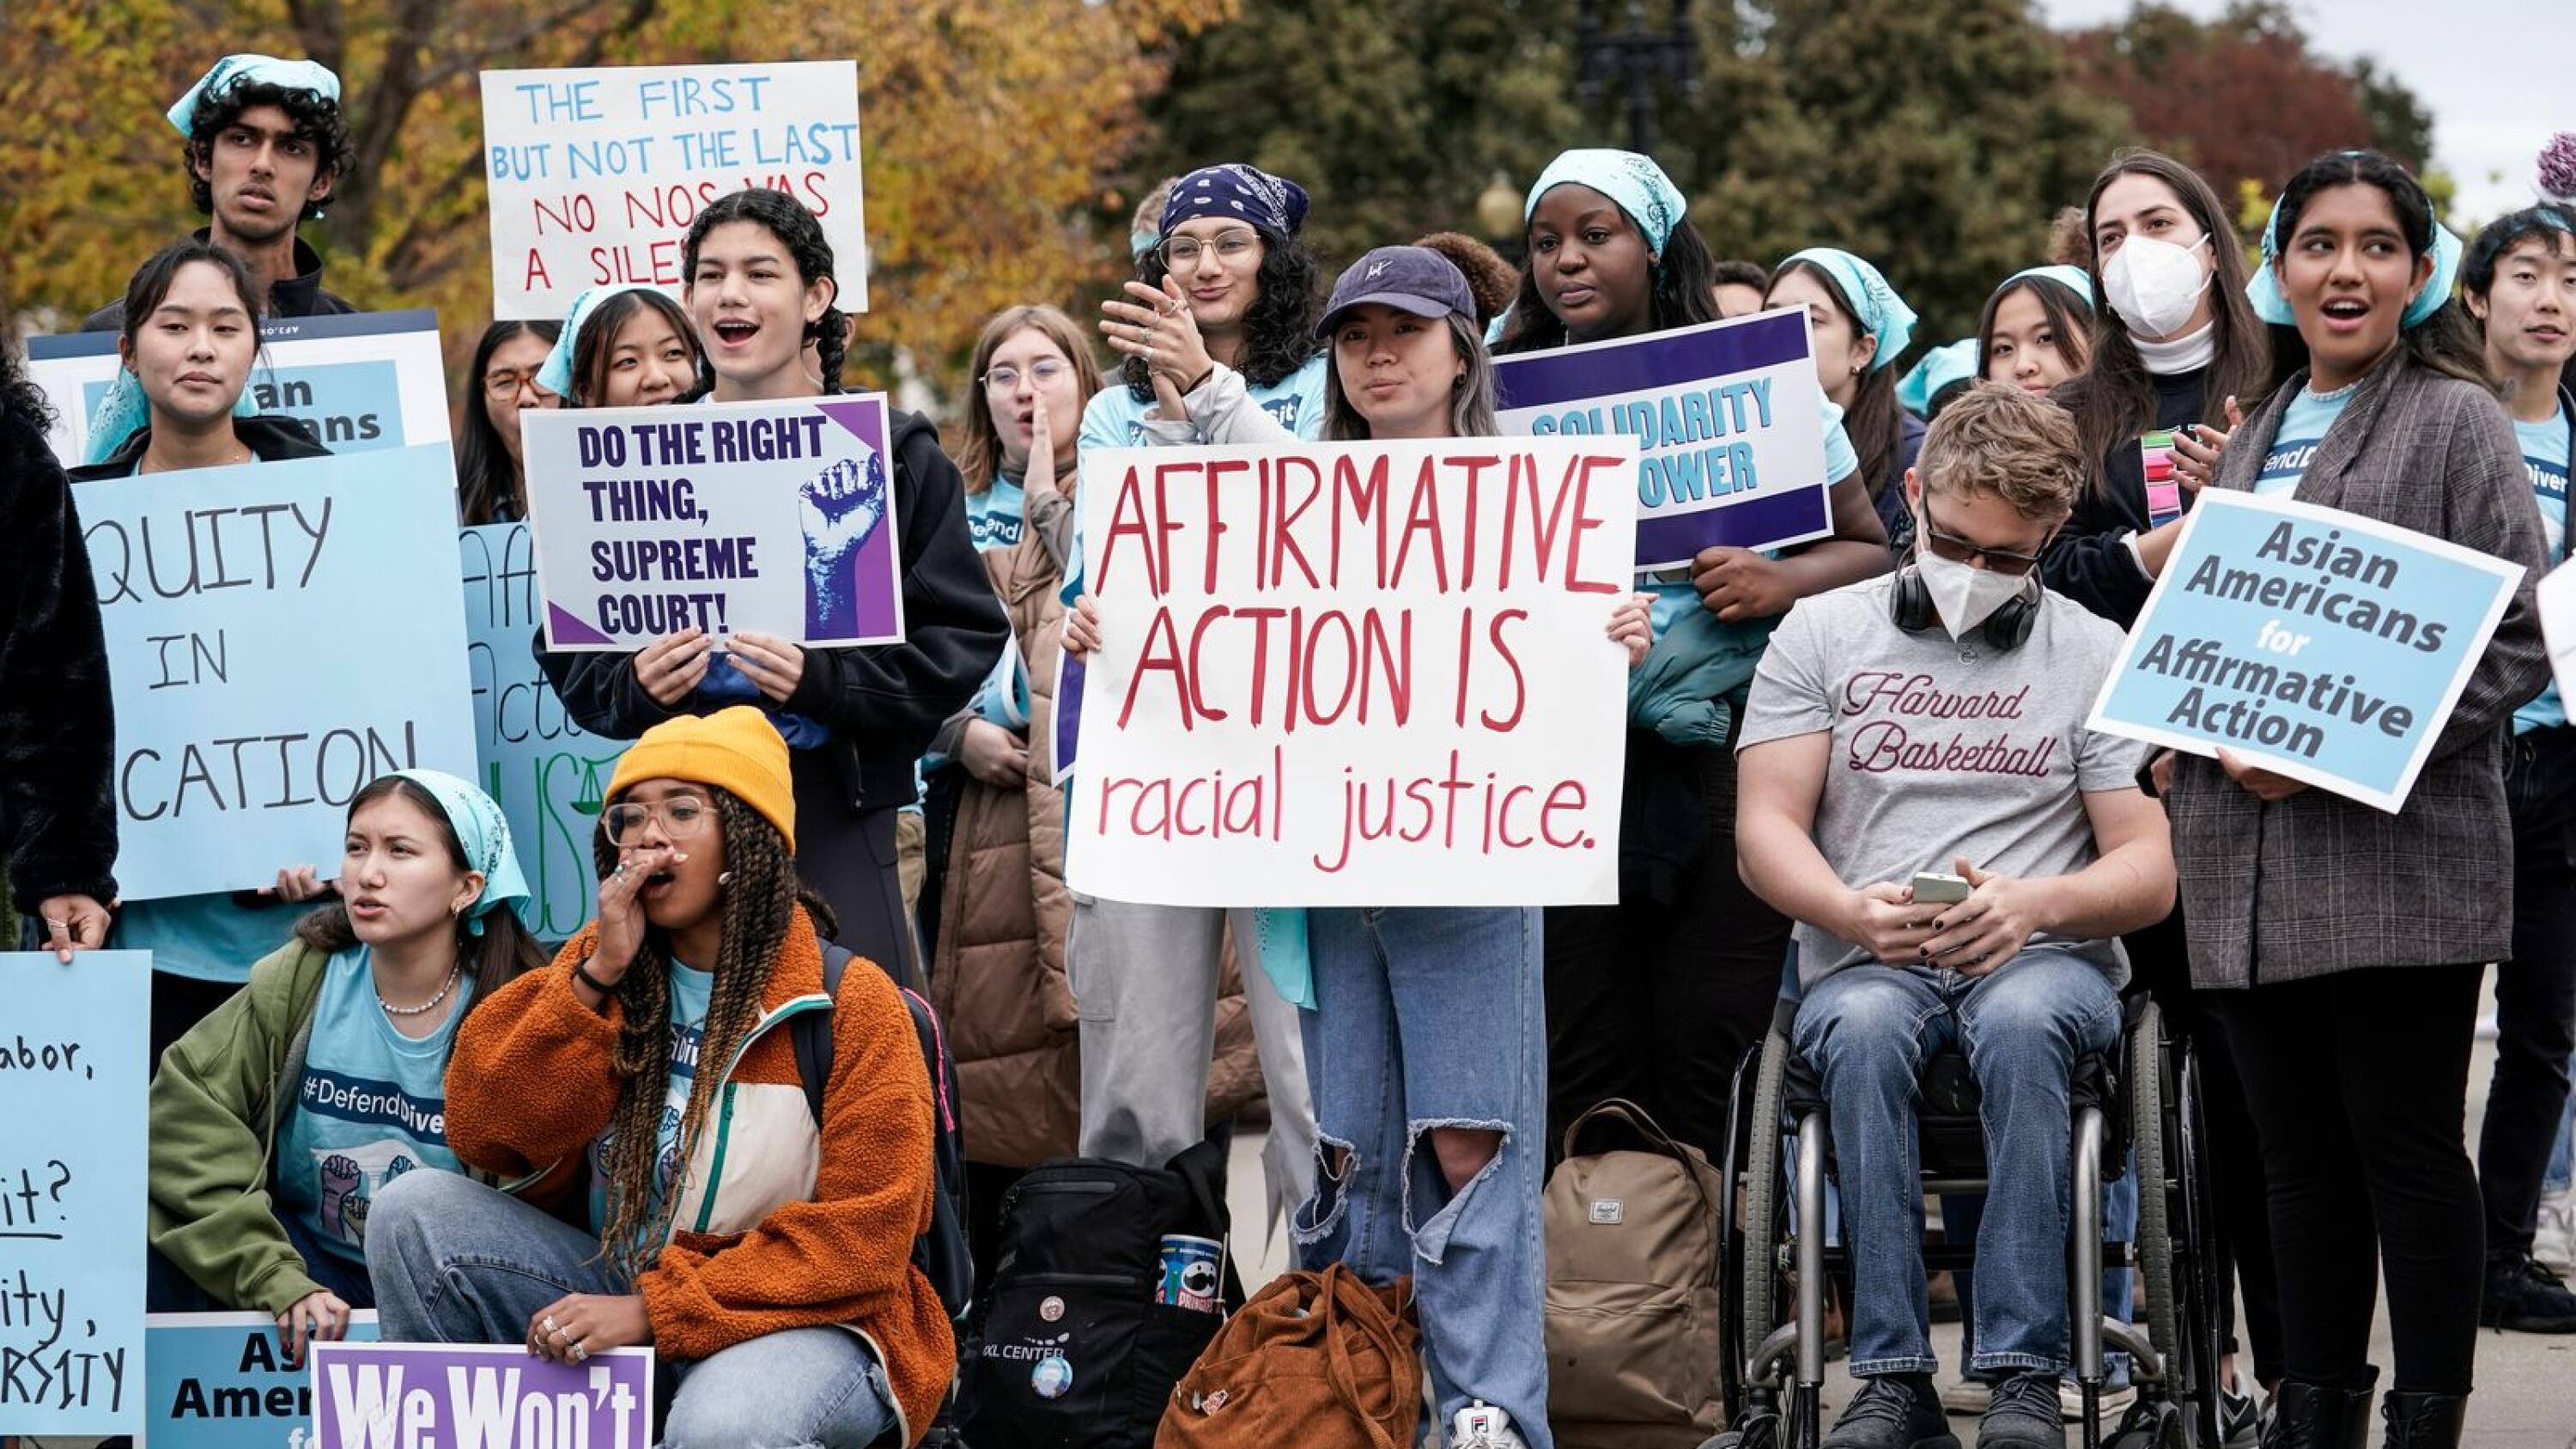 Connecticut colleges weigh in on Supreme Court affirmative action cases